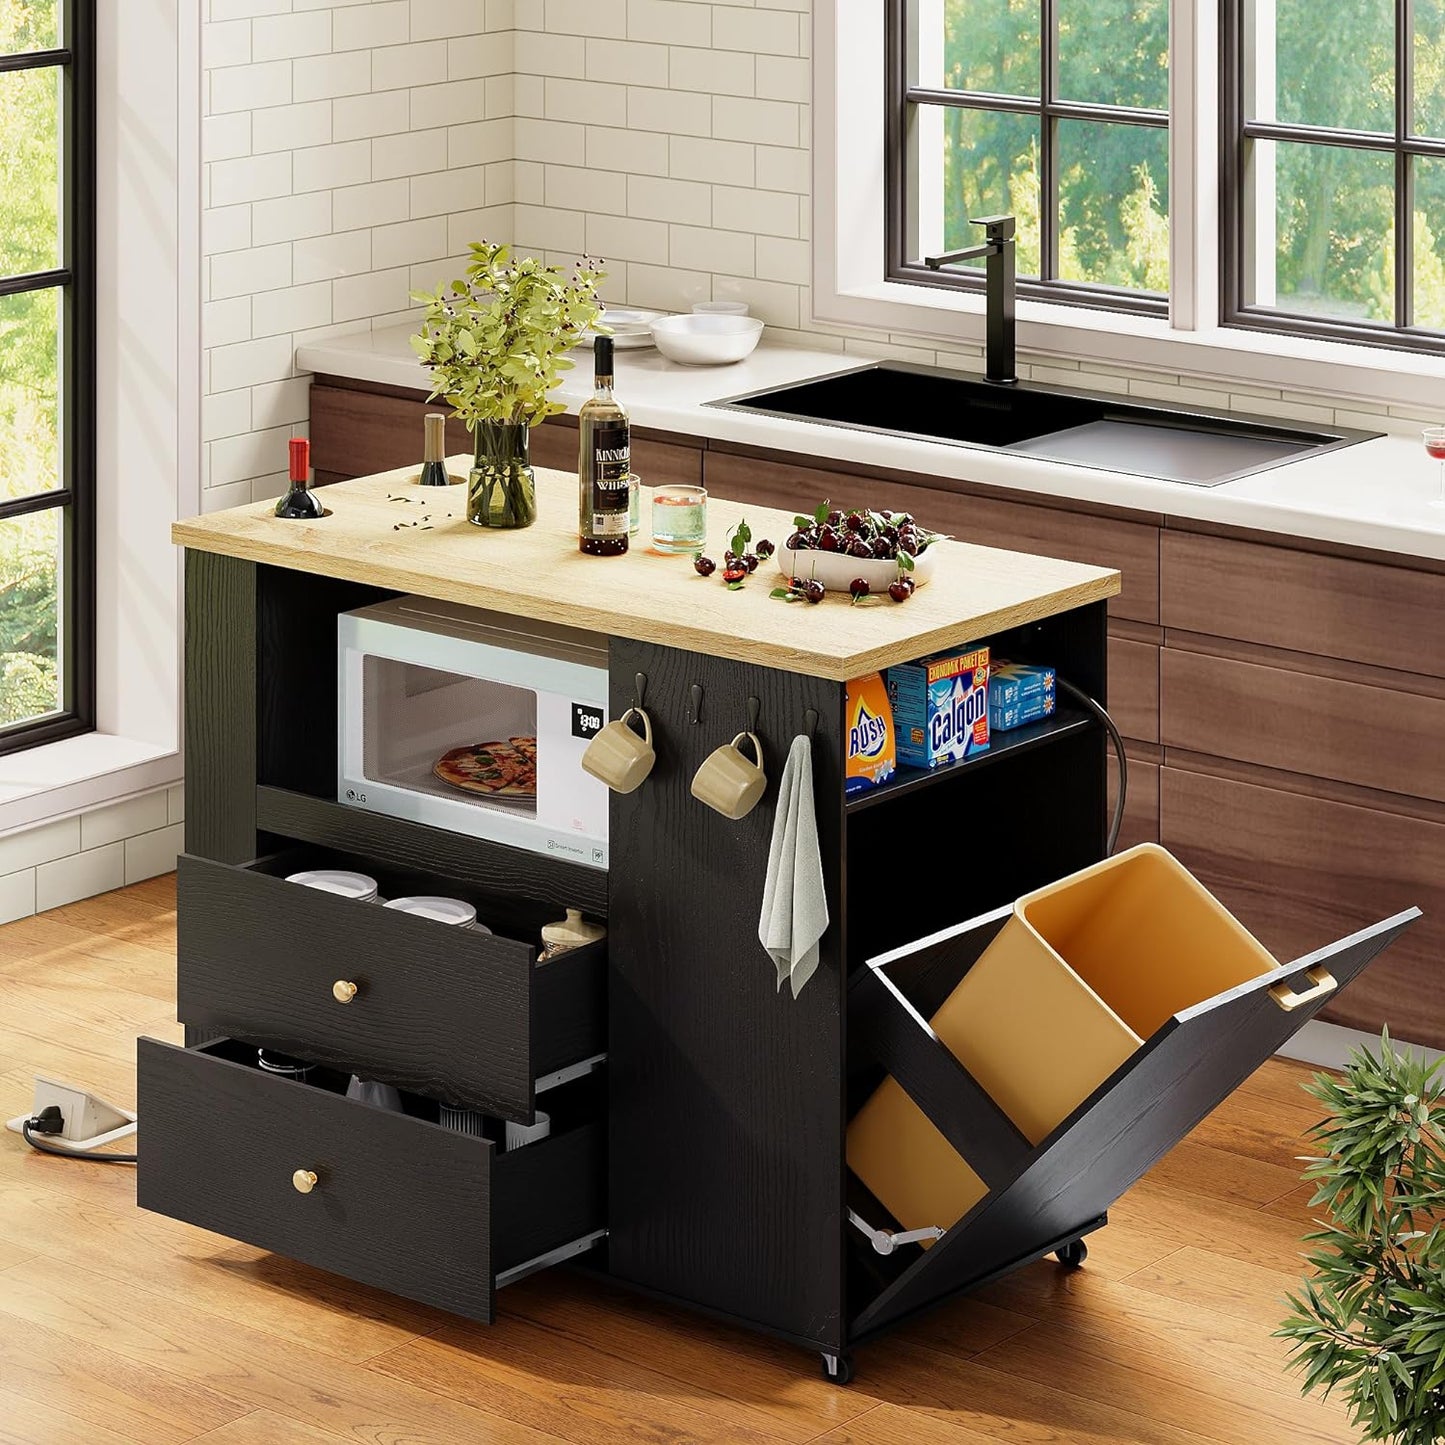 IRONCK Kitchen Island with Trash Can Black